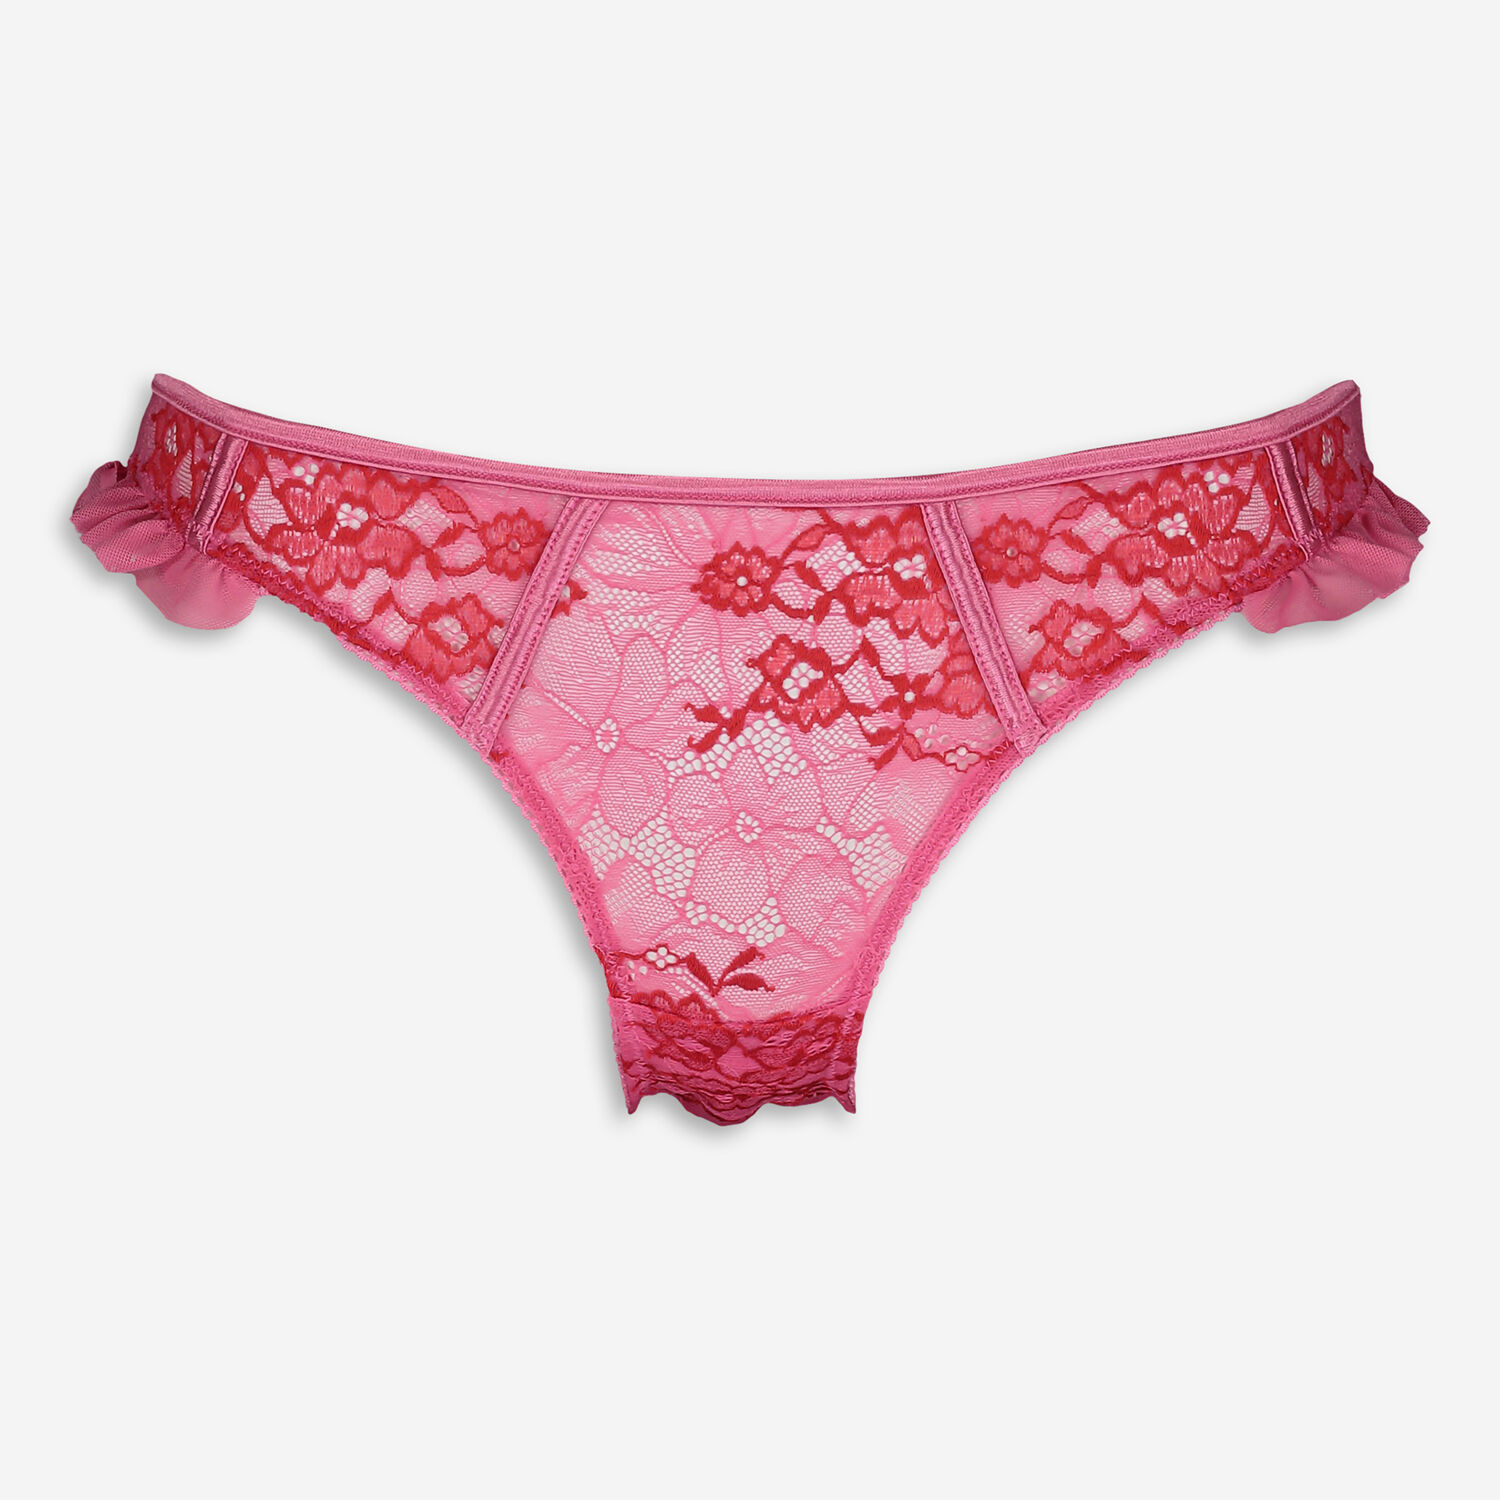 Pink & Red Lace Knickers - TK Maxx UK